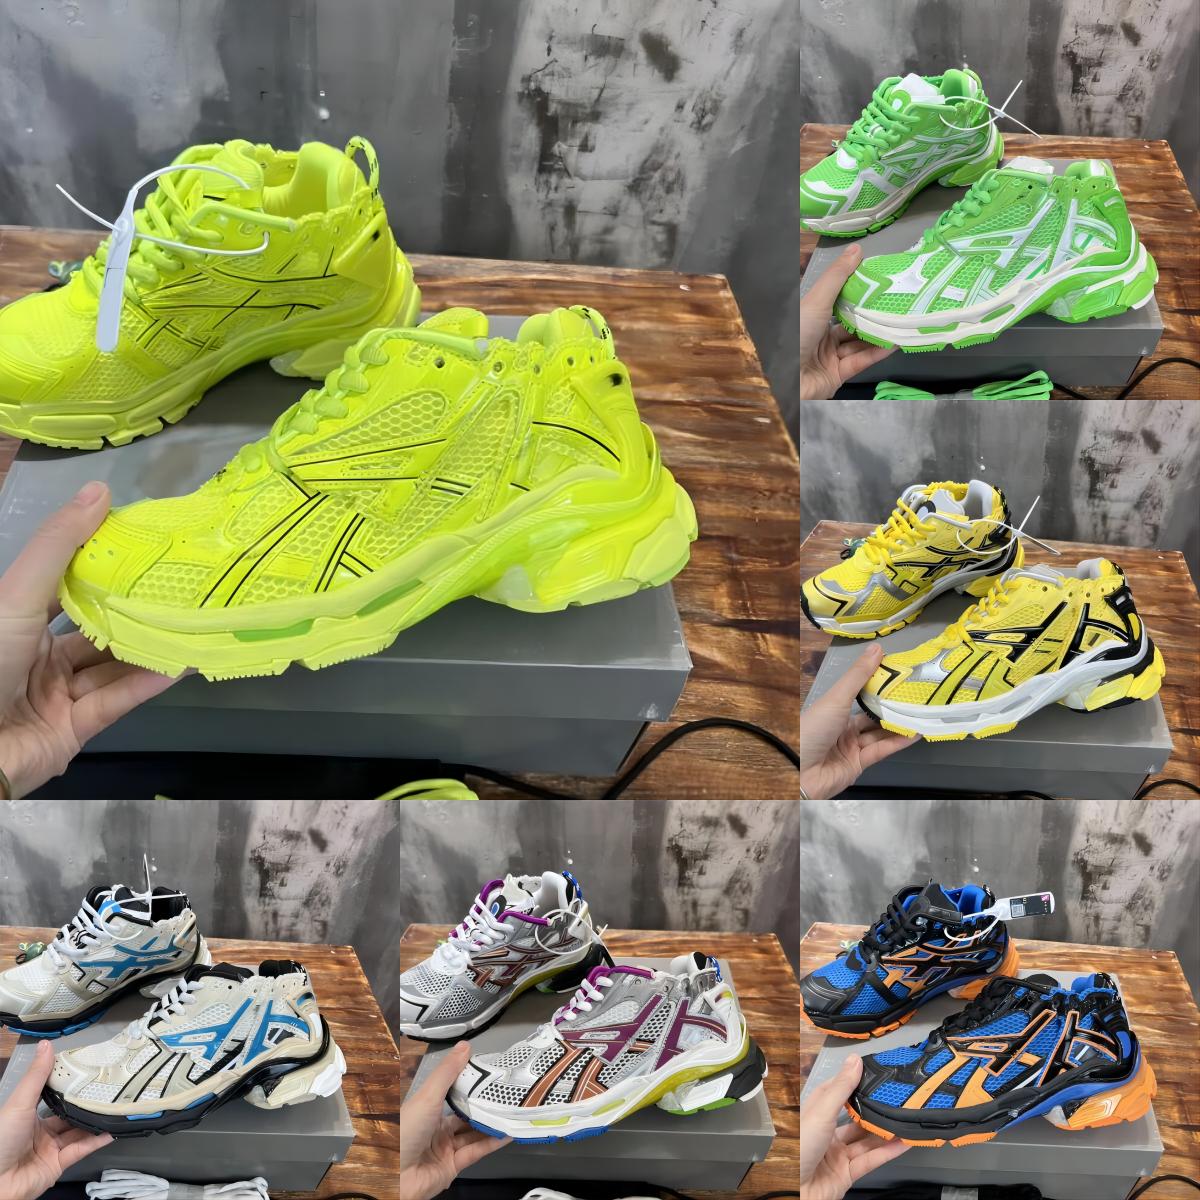 

Triple S 7.0 Runner Sneaker Shoes Designer Hottest Tracks 7 Tess Gomma Paris Speed Platform Fashion Outdoor Sports Sneakers Size 36-46, Color 17